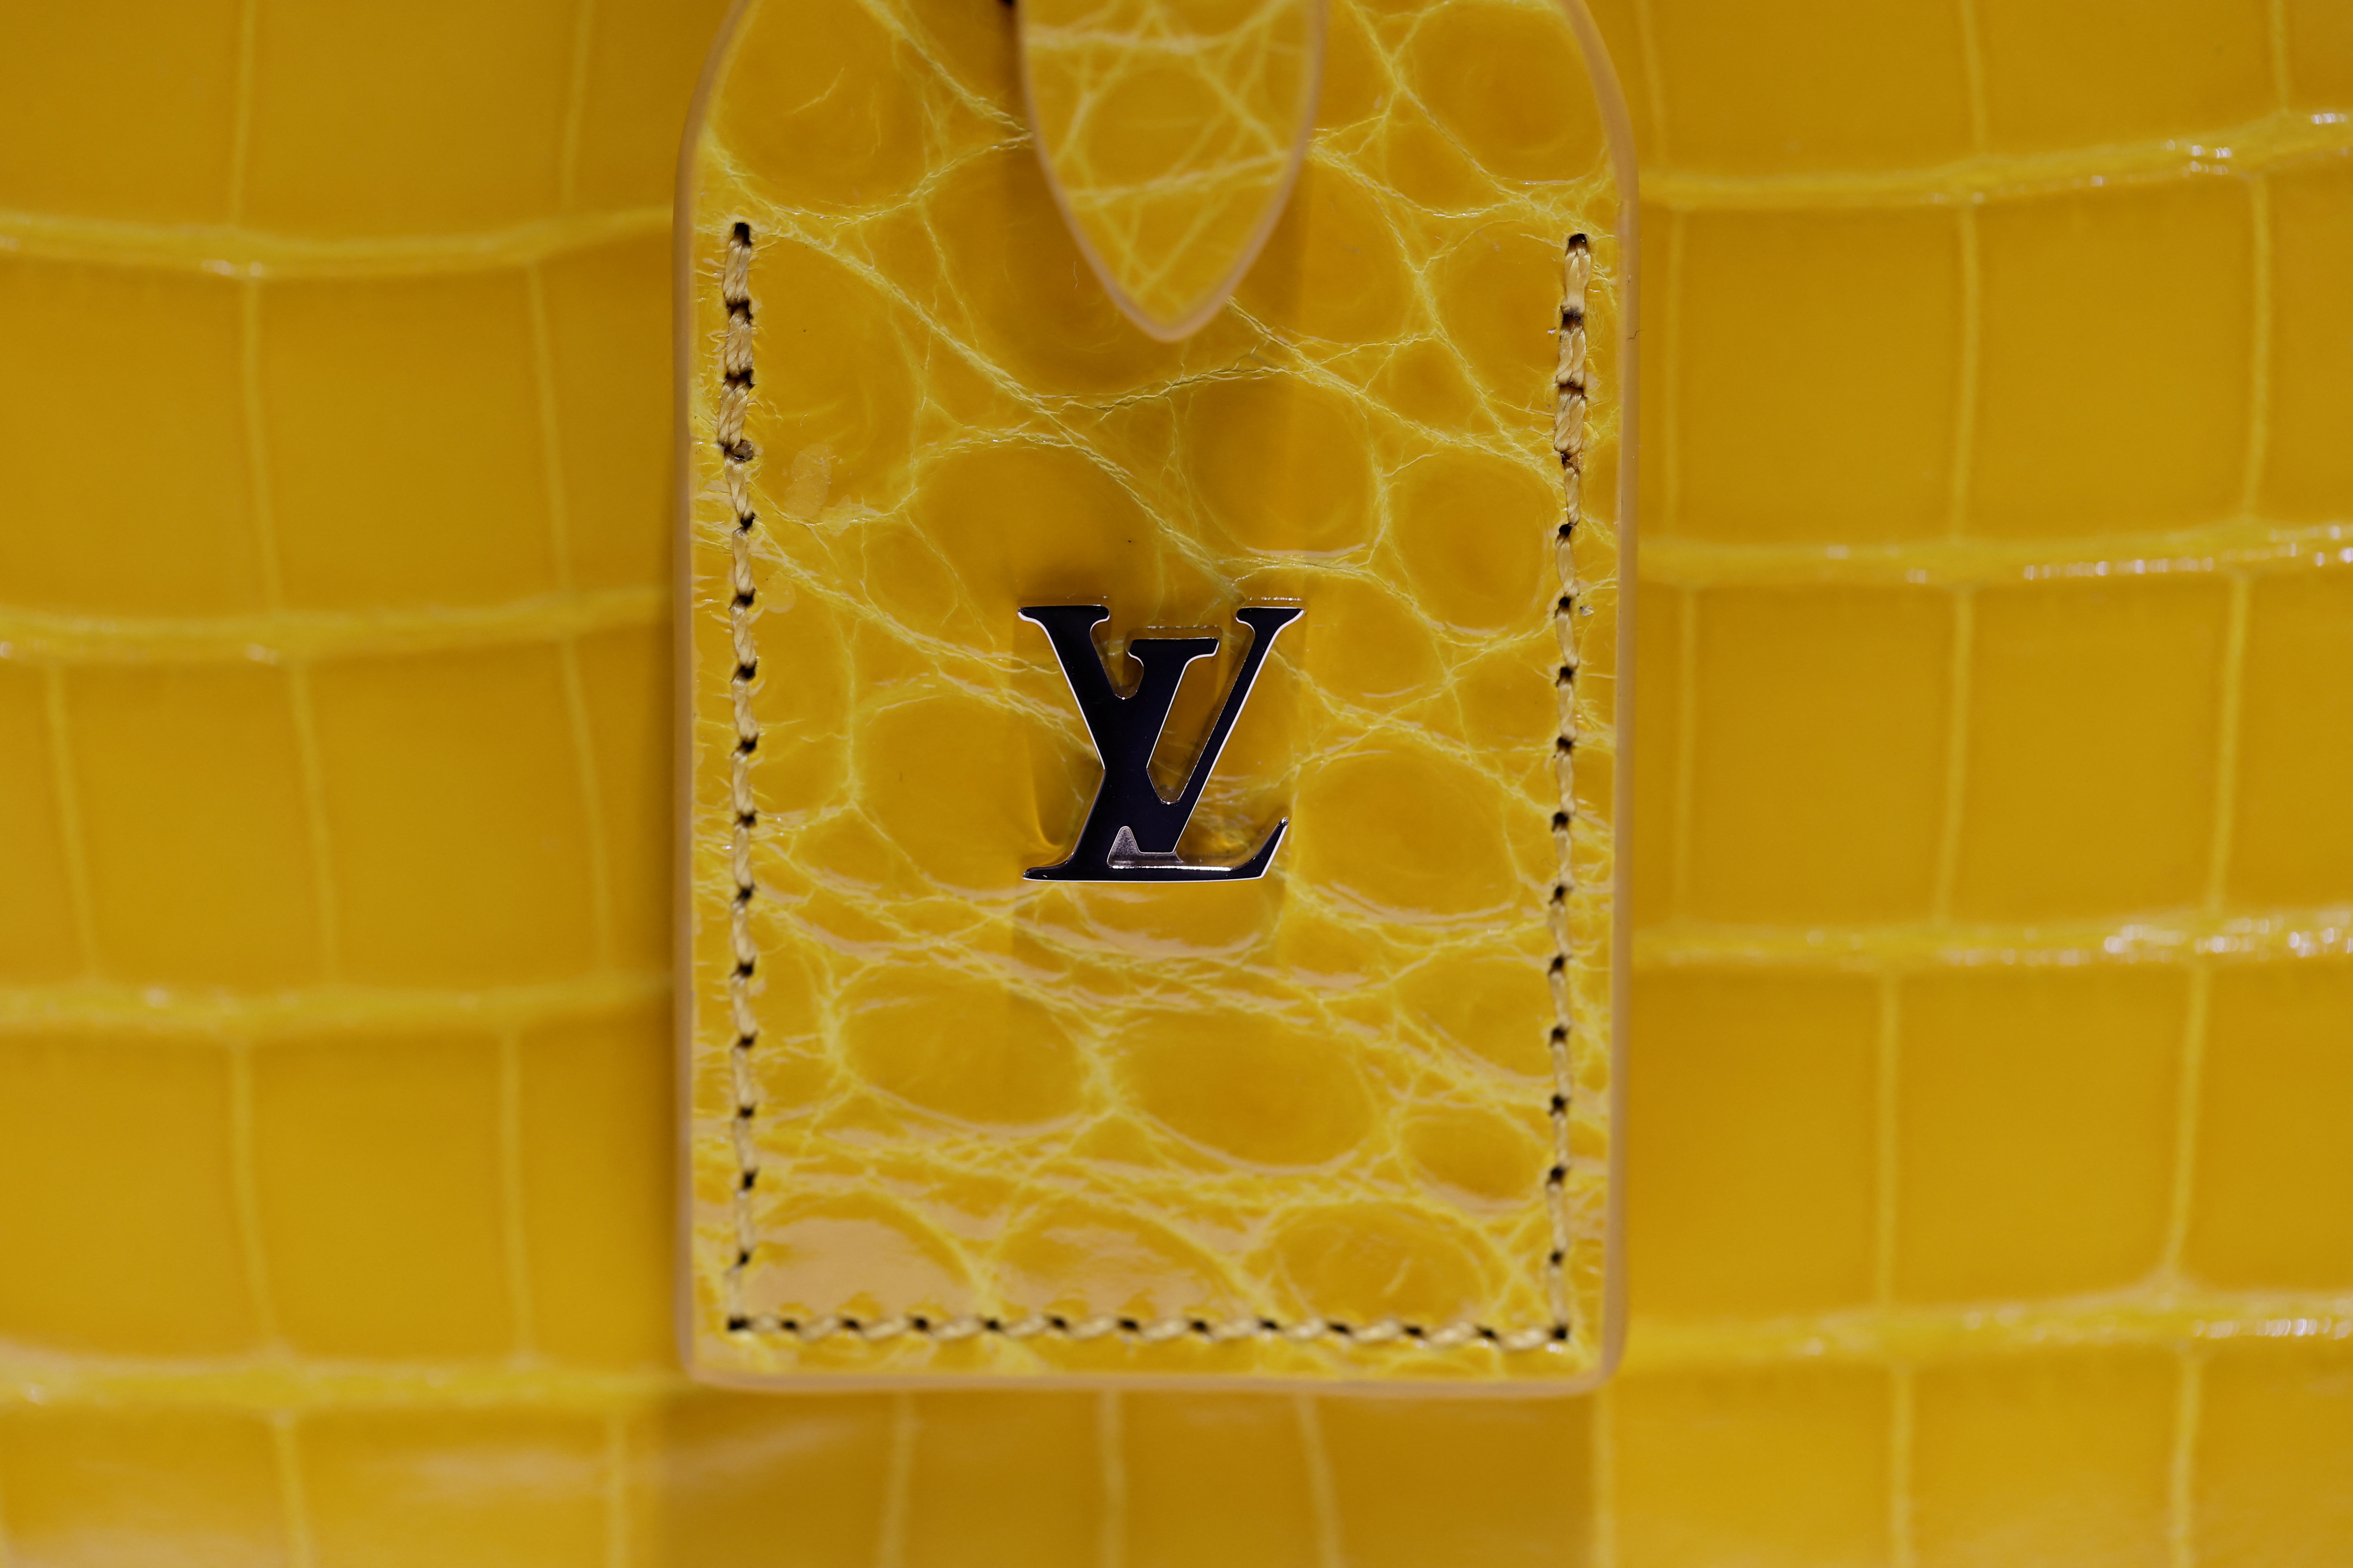 Inauguration of the Atelier Louis Vuitton in Vendome